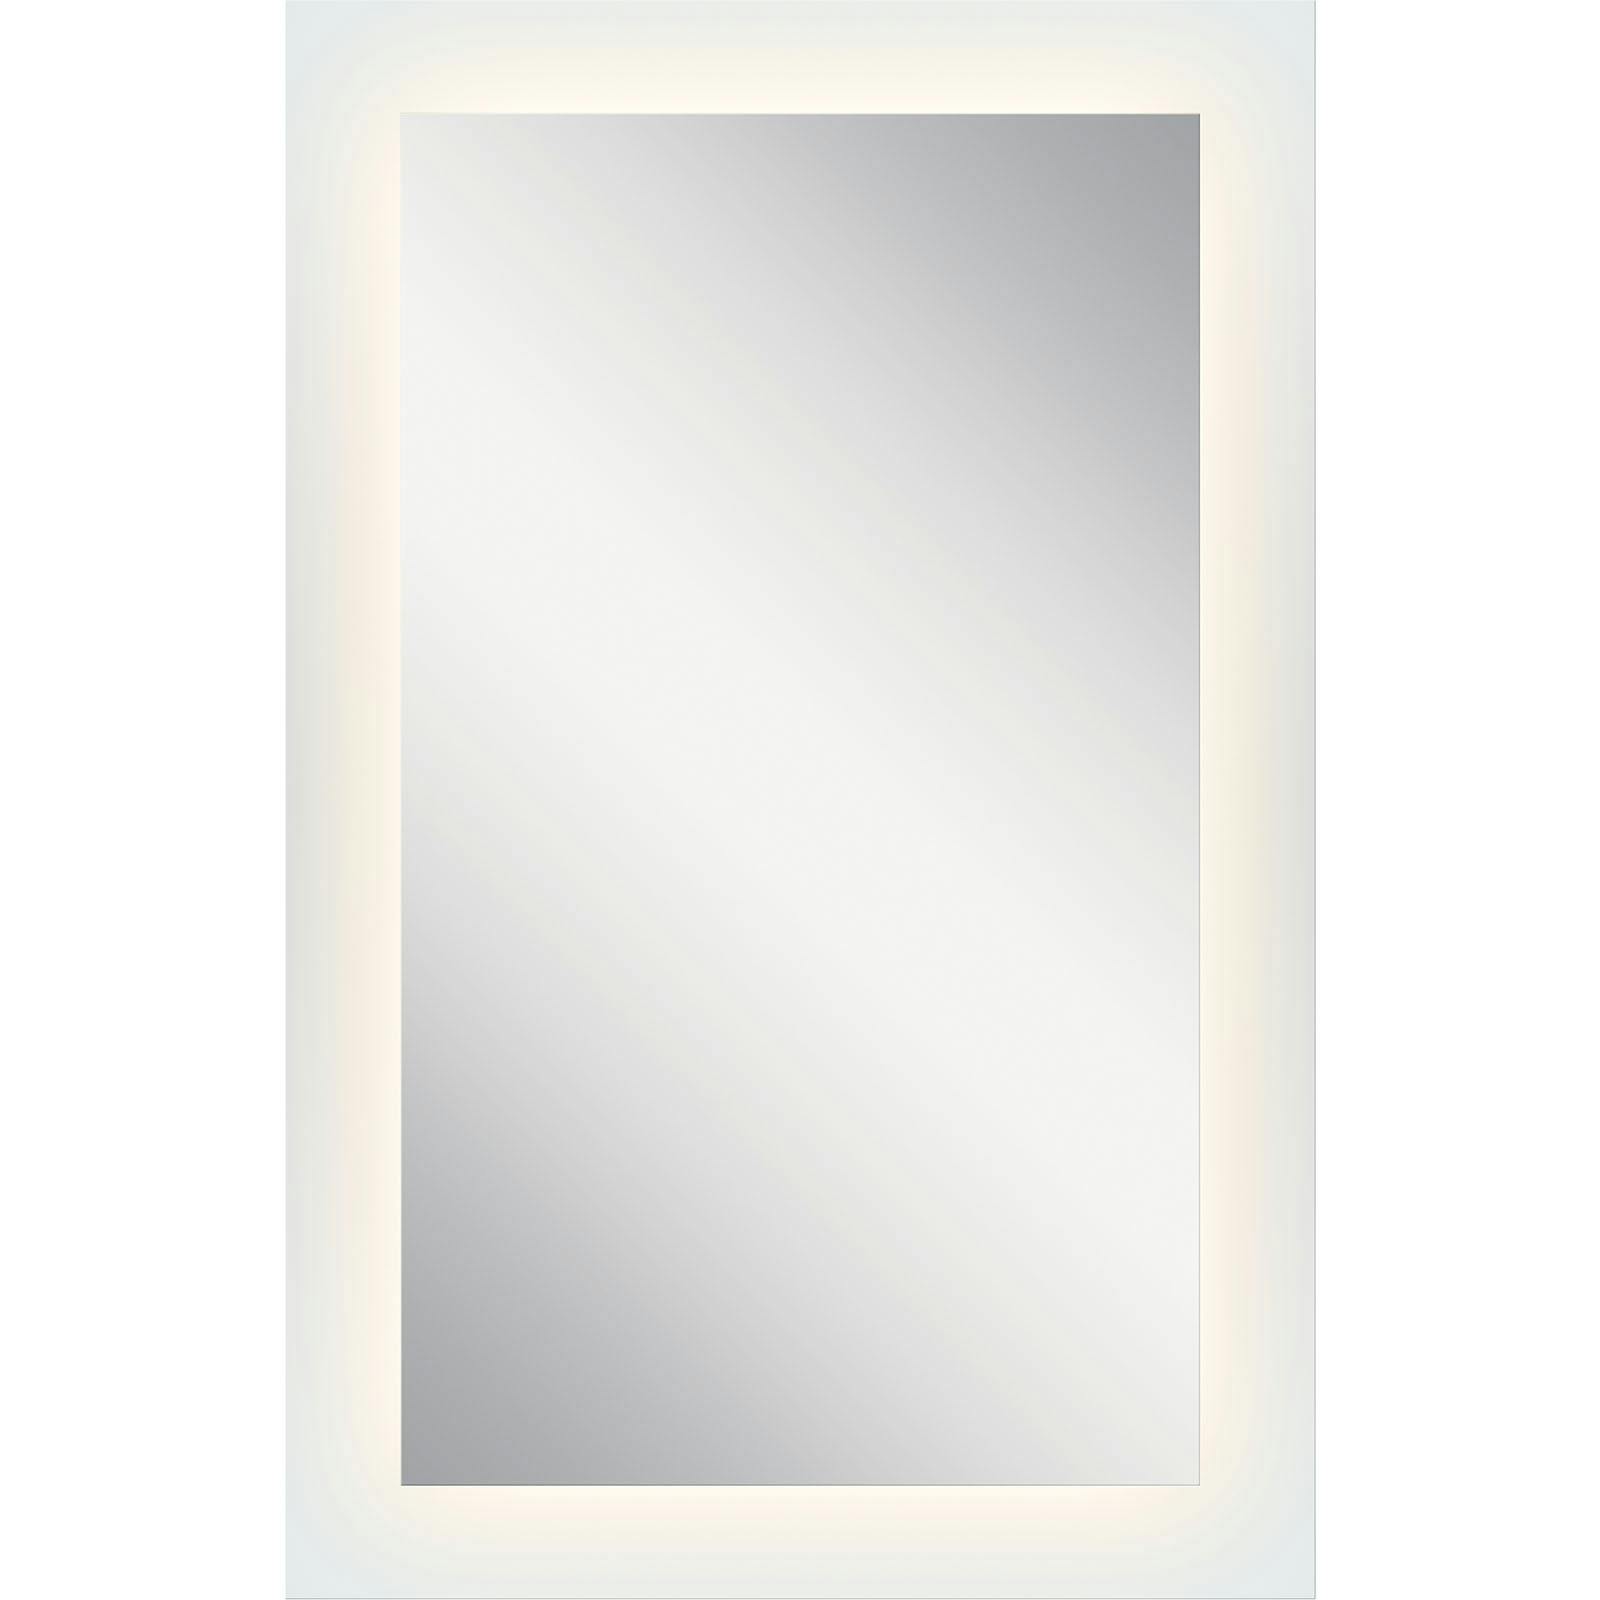 27" x 42" Rectangular LED Backlit Mirror hung vertically on a white background